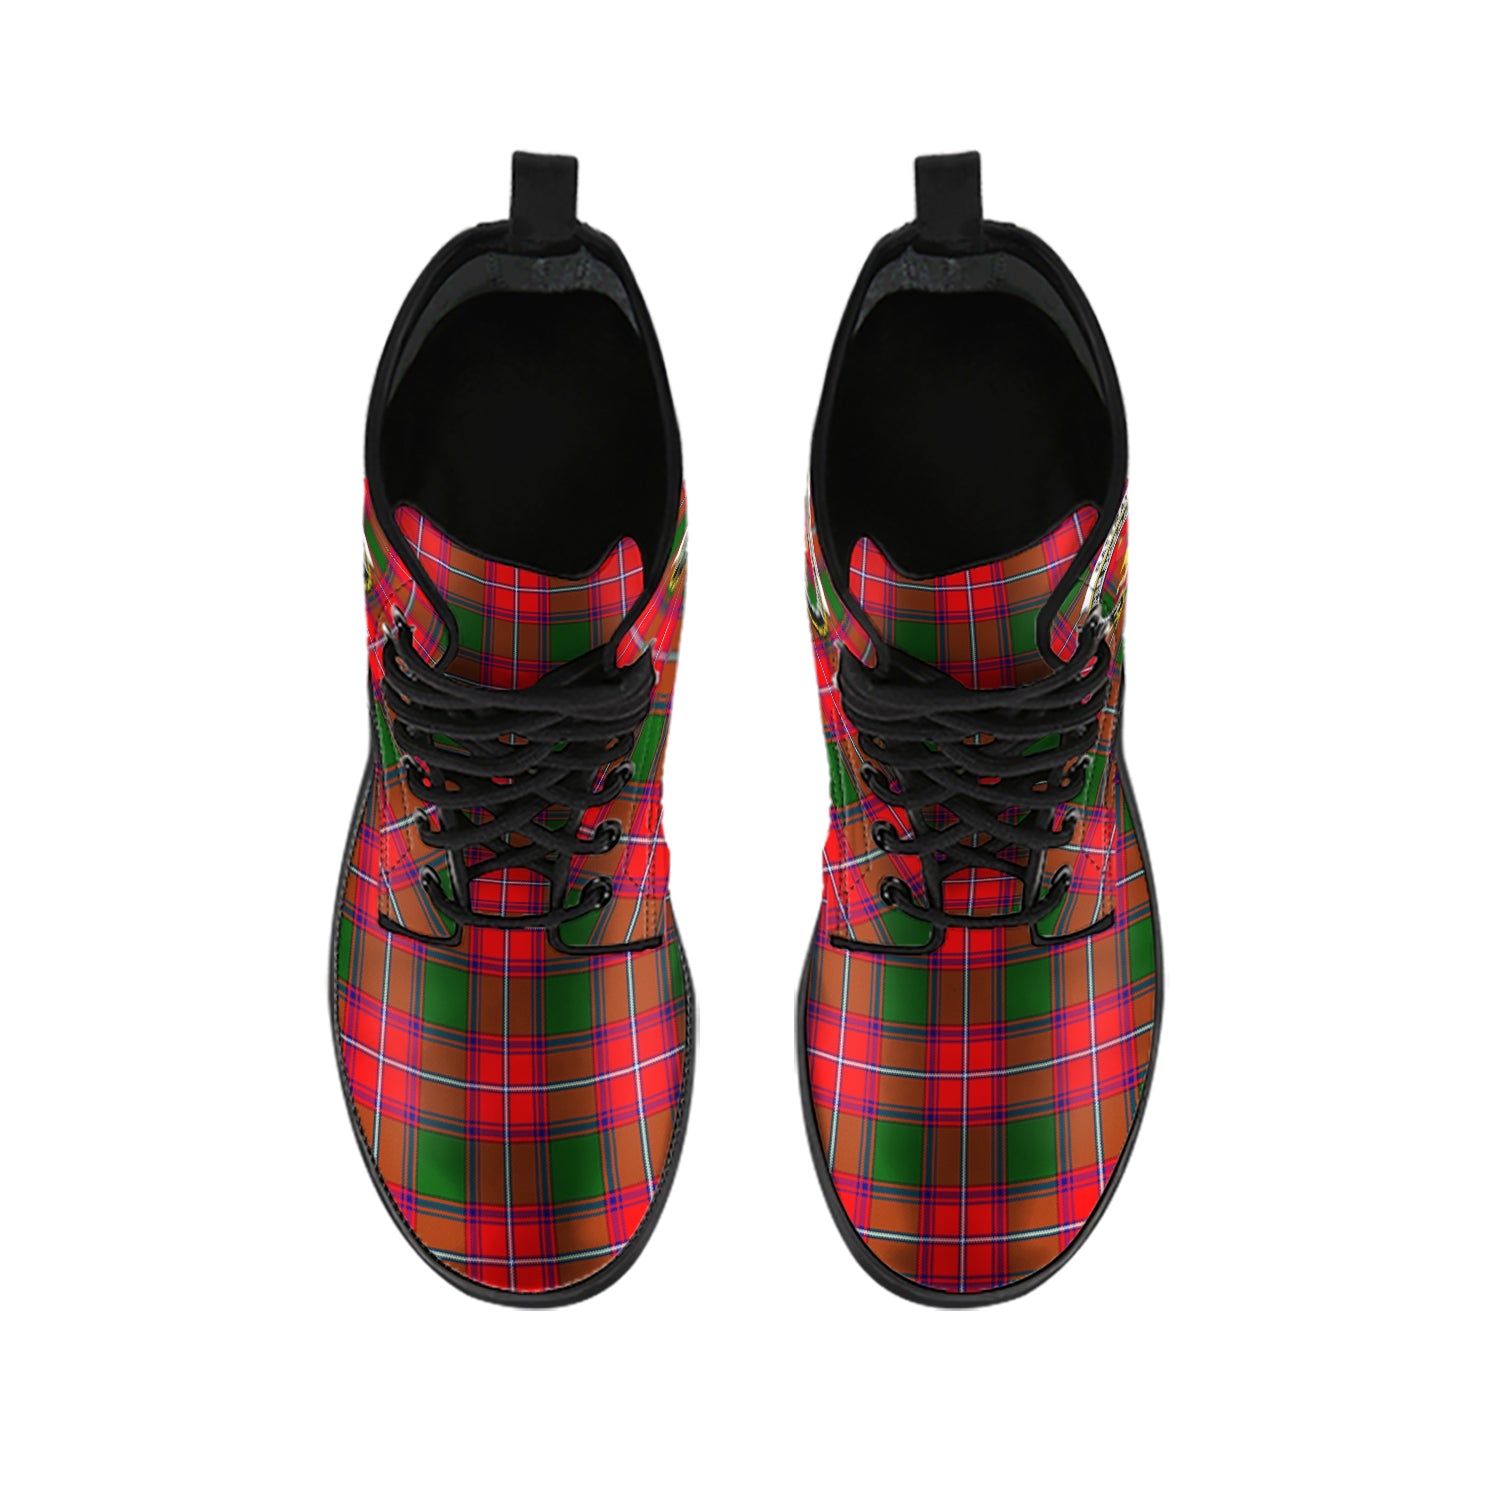 rattray-modern-tartan-leather-boots-with-family-crest